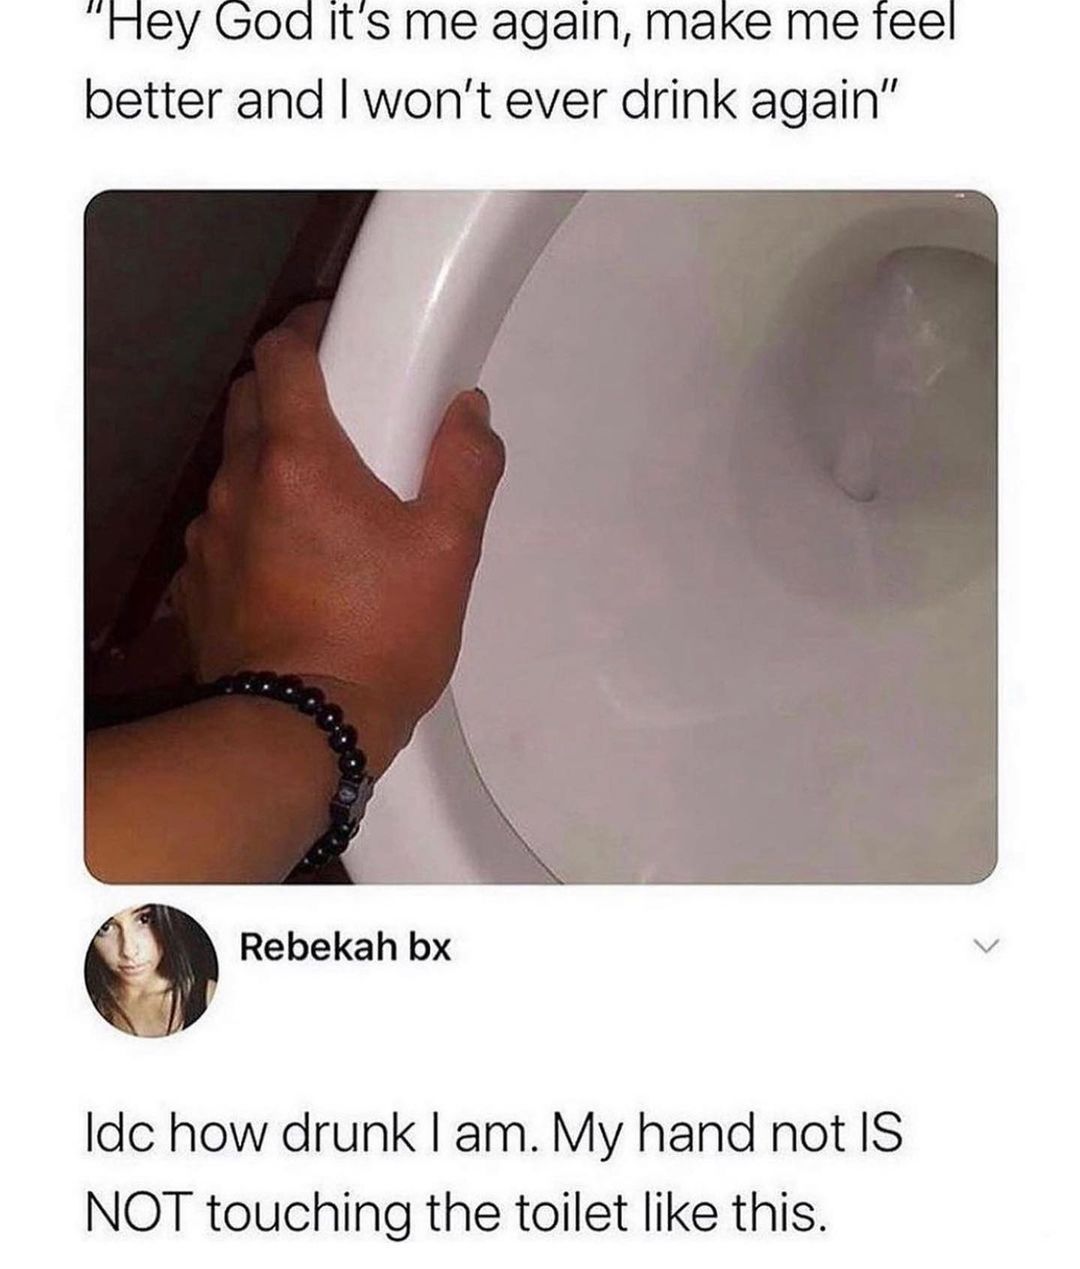 God it'S me again, make me feel better and I won't ever drink again".  Idc how drunk I am. My hand not is not touching the toilet like this.